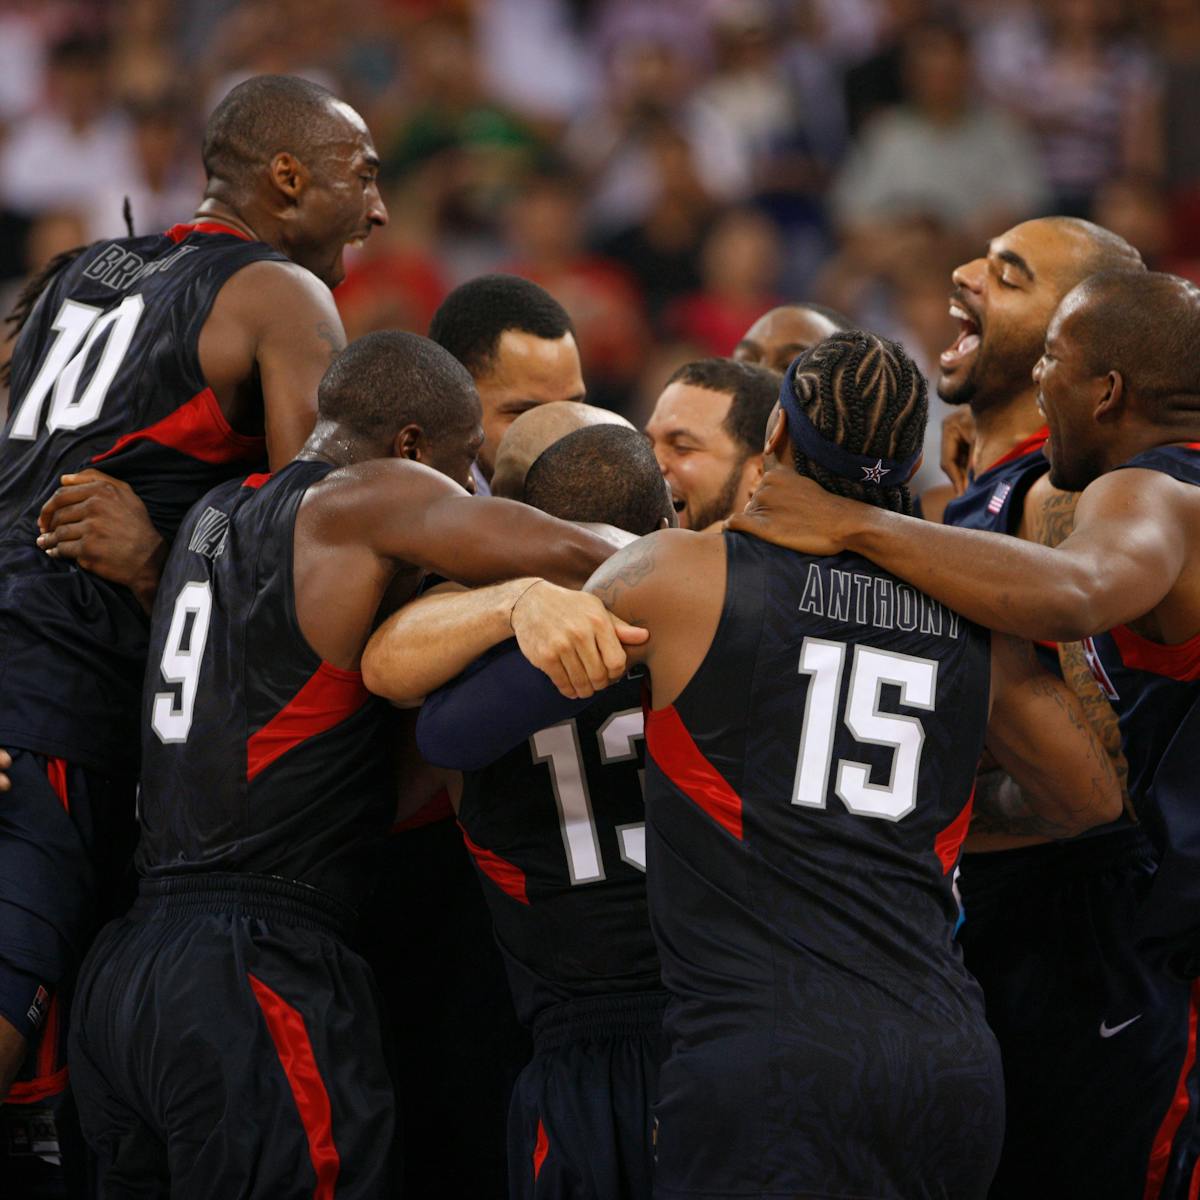 The Redeem Team hug excitedly in black and red uniforms.